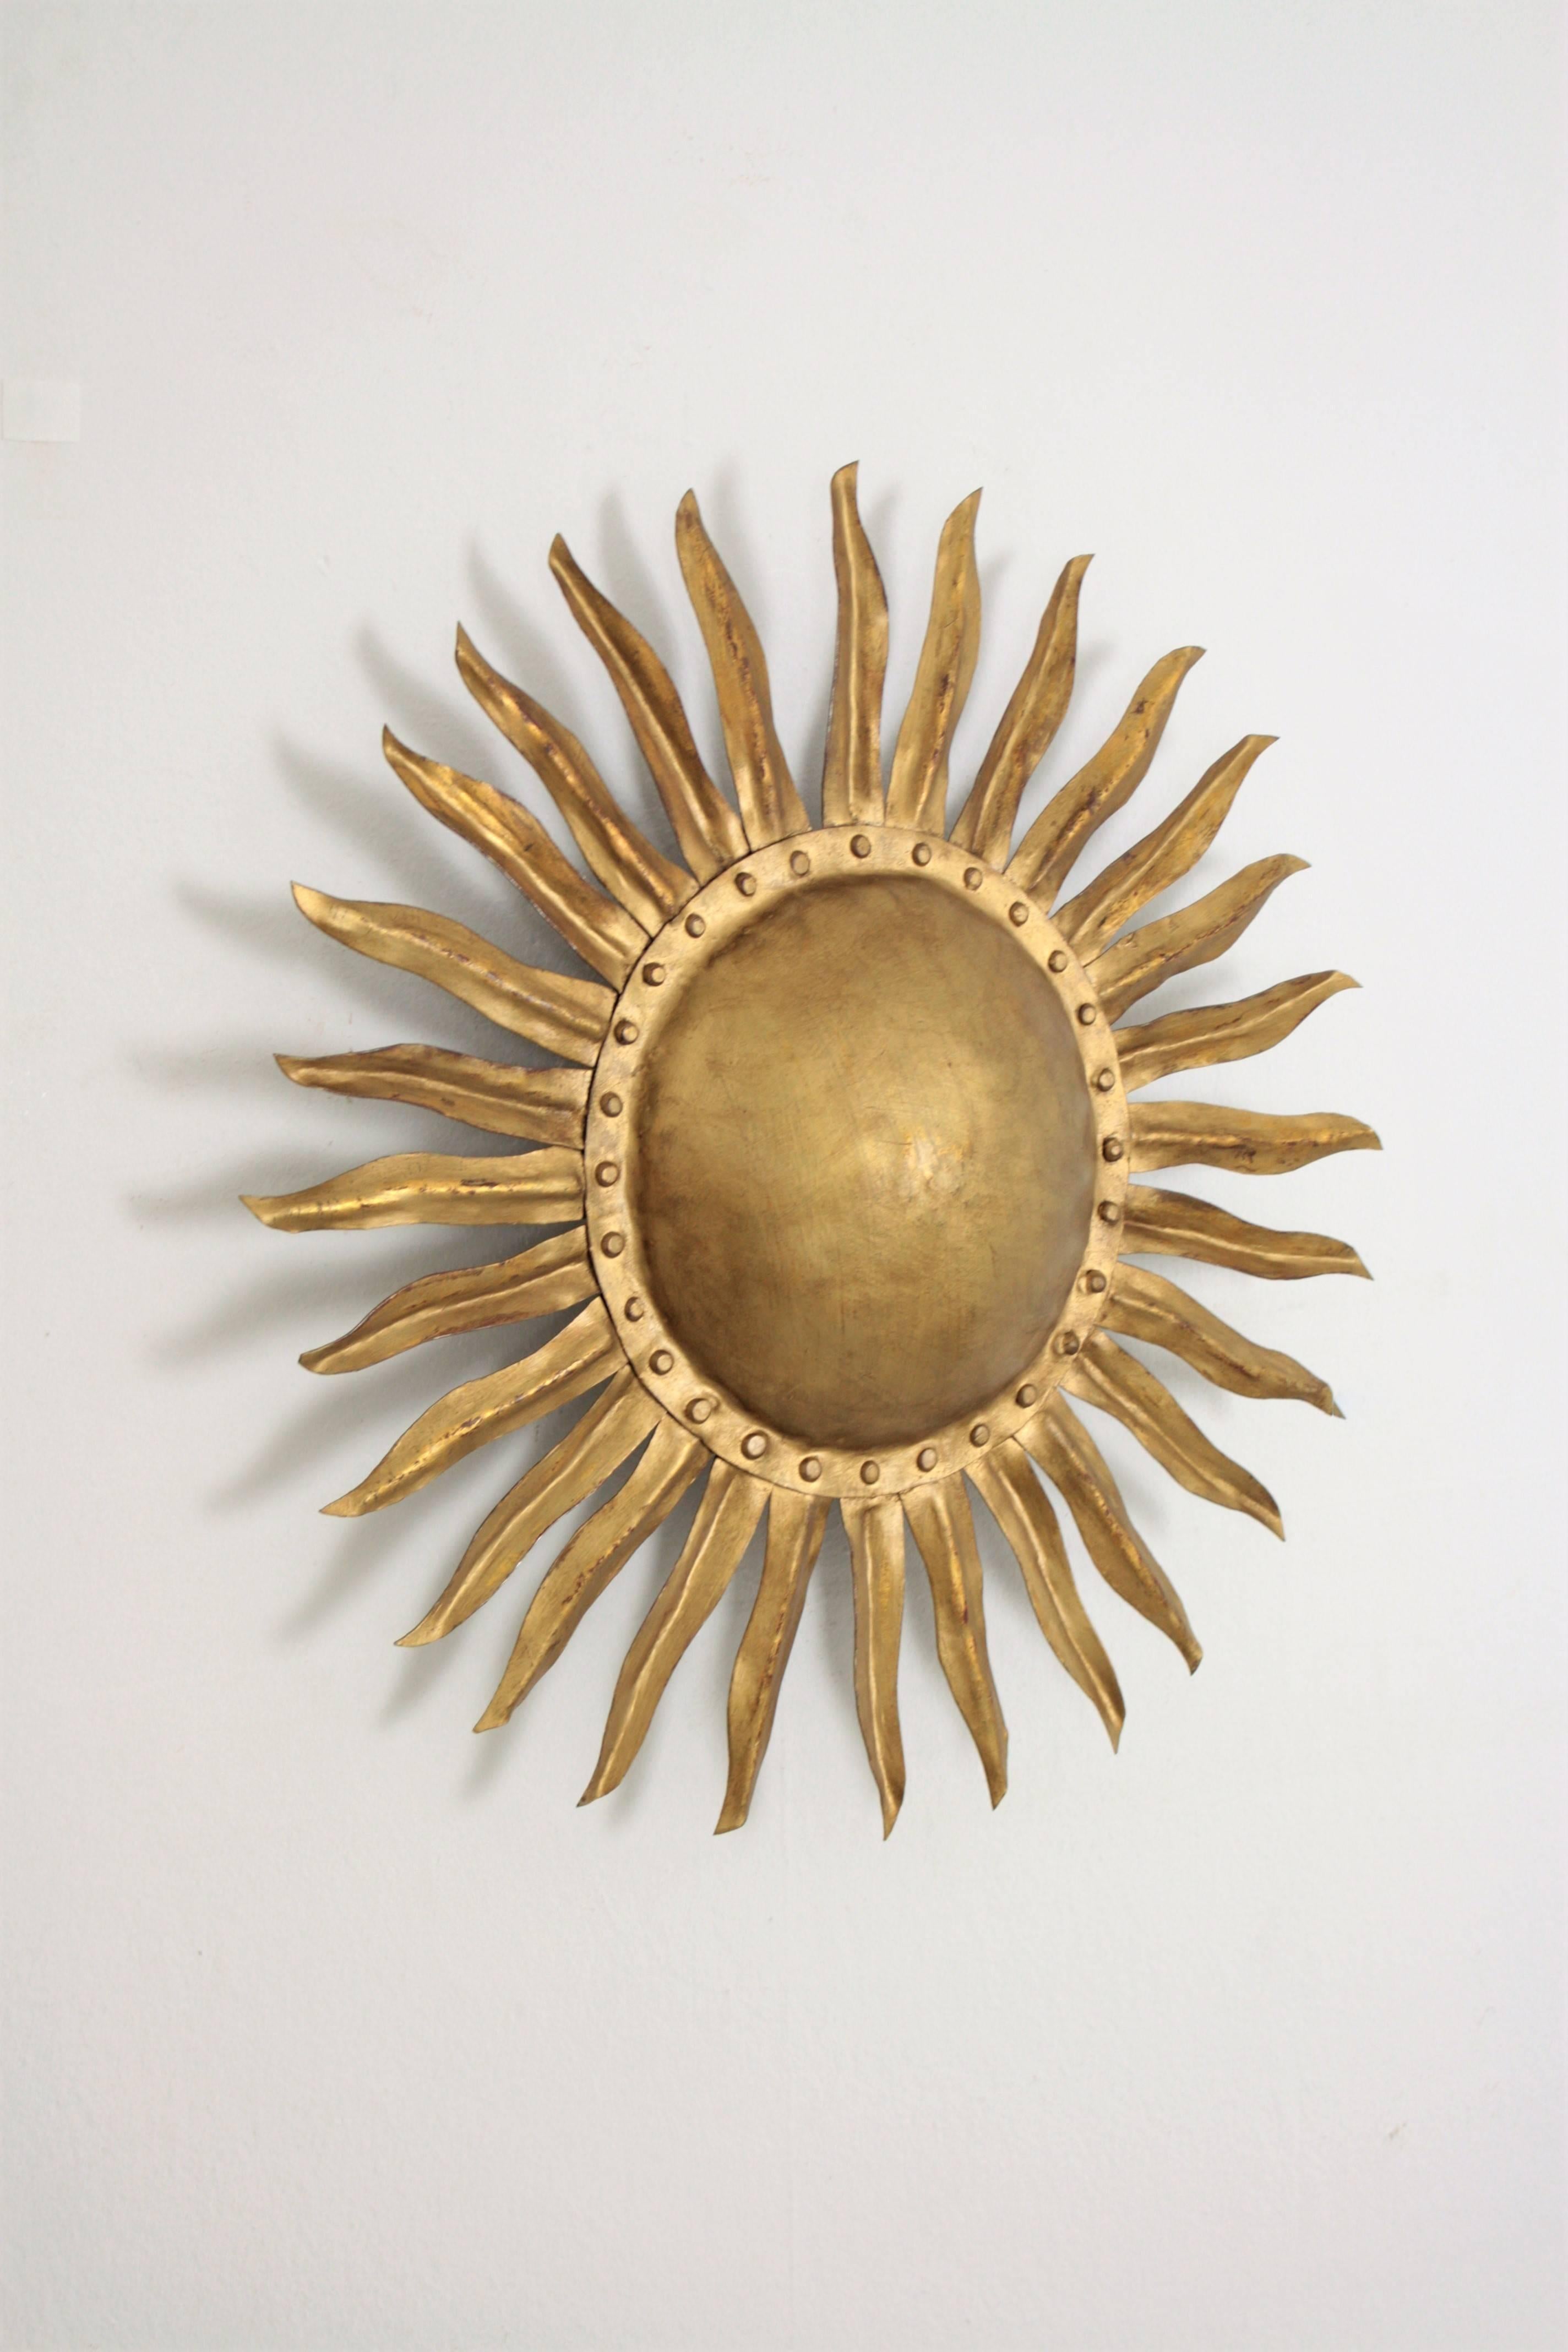 Unique hand-hammered gilt iron sunburst wall decoration or light fixture. Beautiful detail of nails surrounding the central sphere.
A highly decorative piece placed alone but also beautiful placed with other sunburst mirrors. Spain, 1940s.

Follow